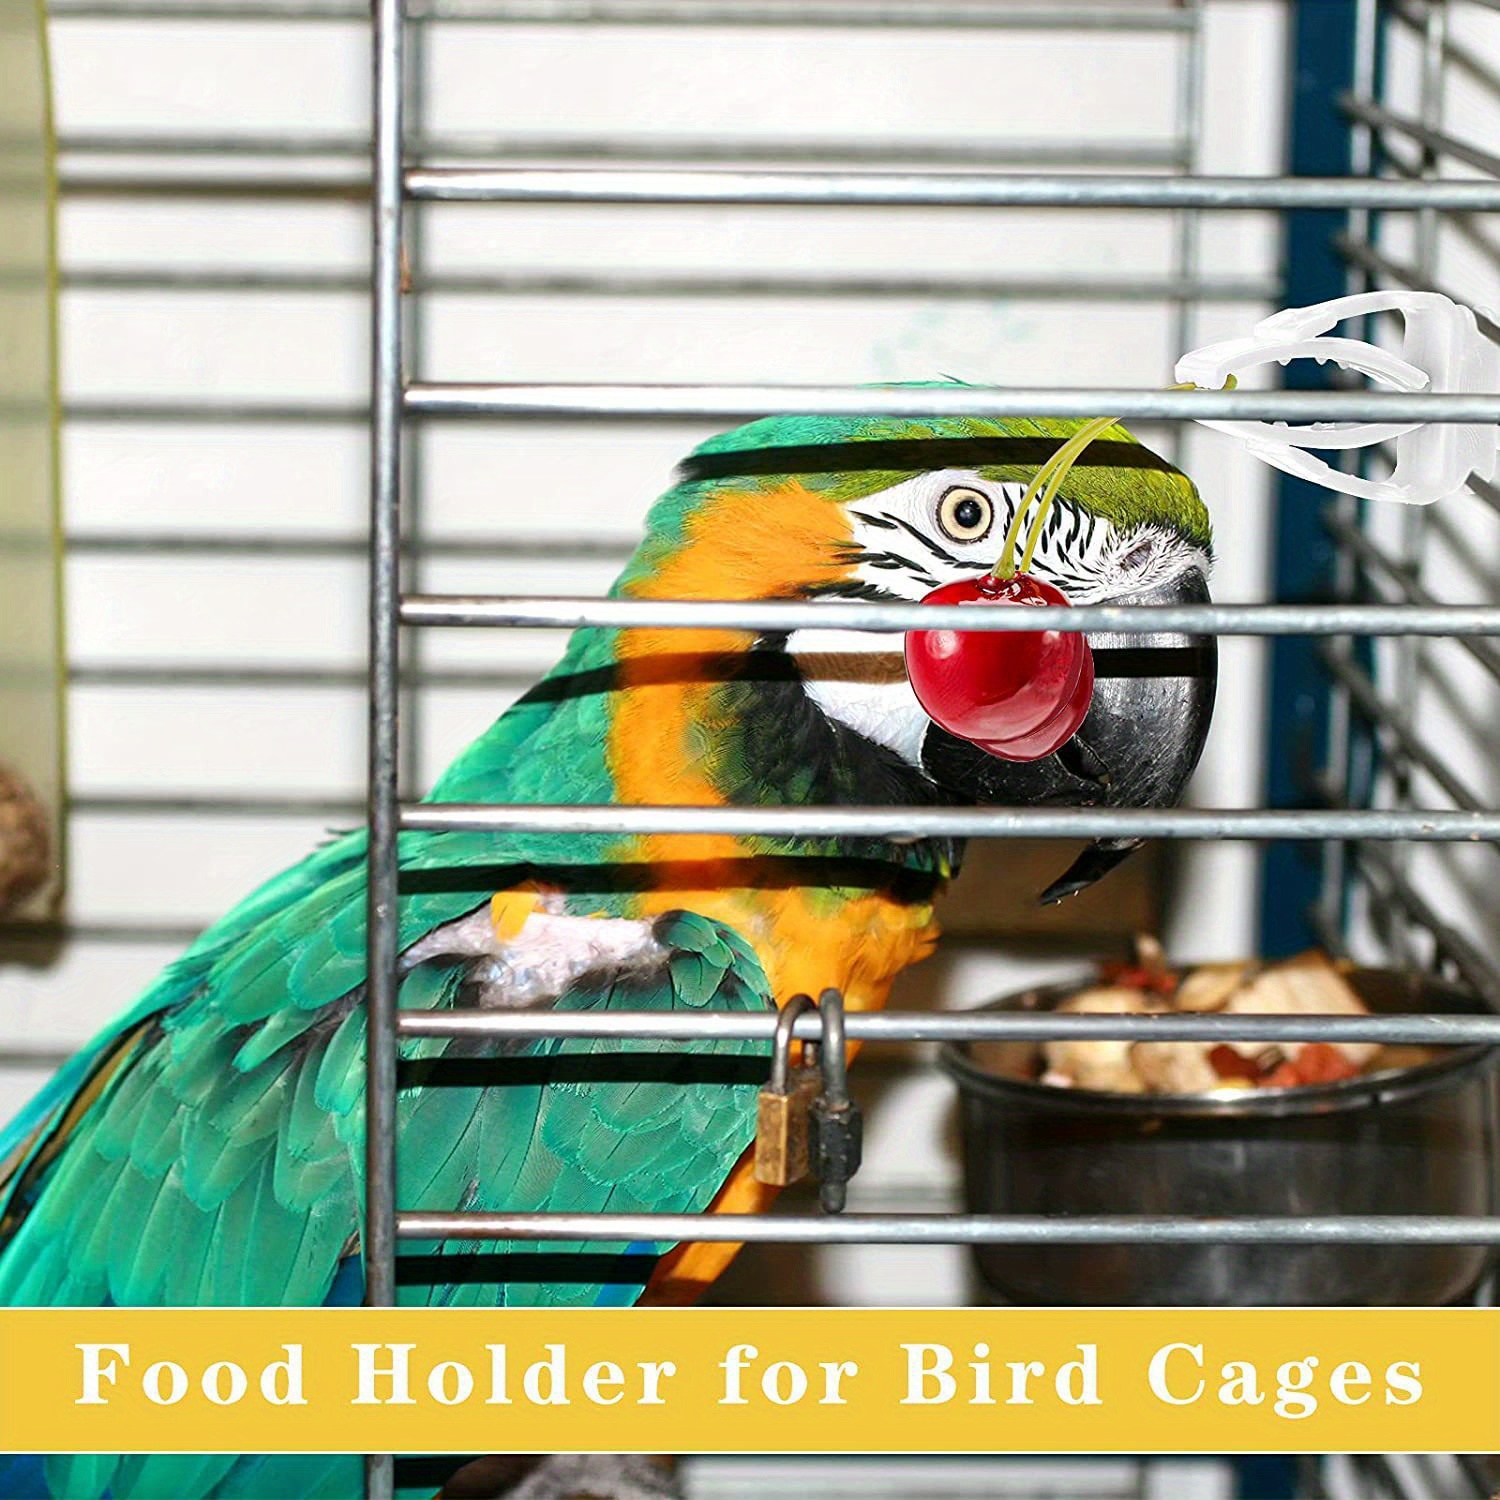 

6pcs Bird Cage Food Holders, Parrot Fruit Vegetable Clips, Bird Cage Feeder Clip For Budgie Parakeet Cockatoo Macaw Cockatiel